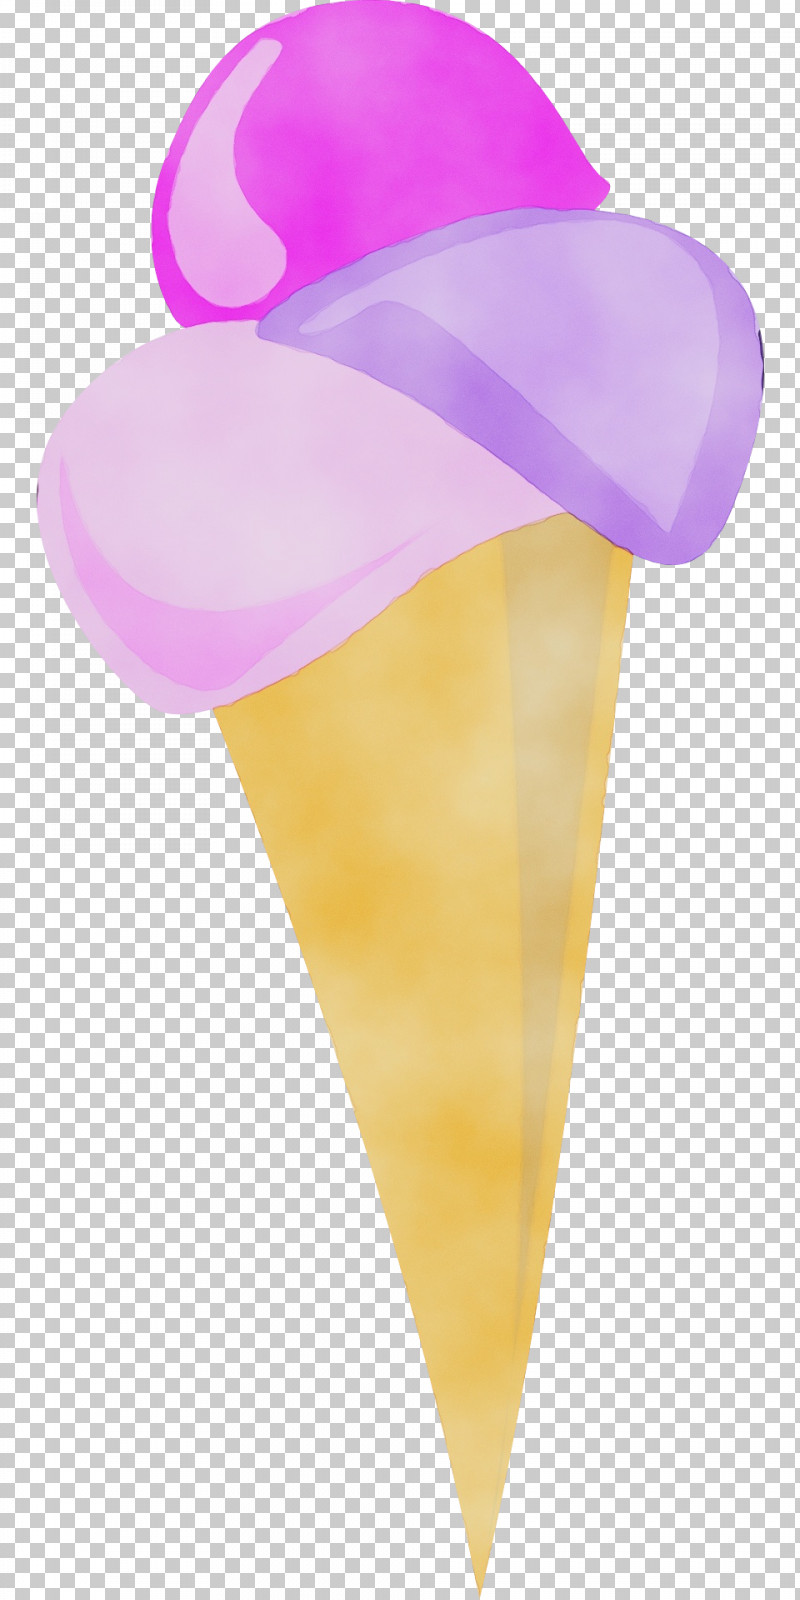 Ice Cream Cone Pink M Cone PNG, Clipart, Cone, Ice Cream Cone, Paint, Pink M, Watercolor Free PNG Download